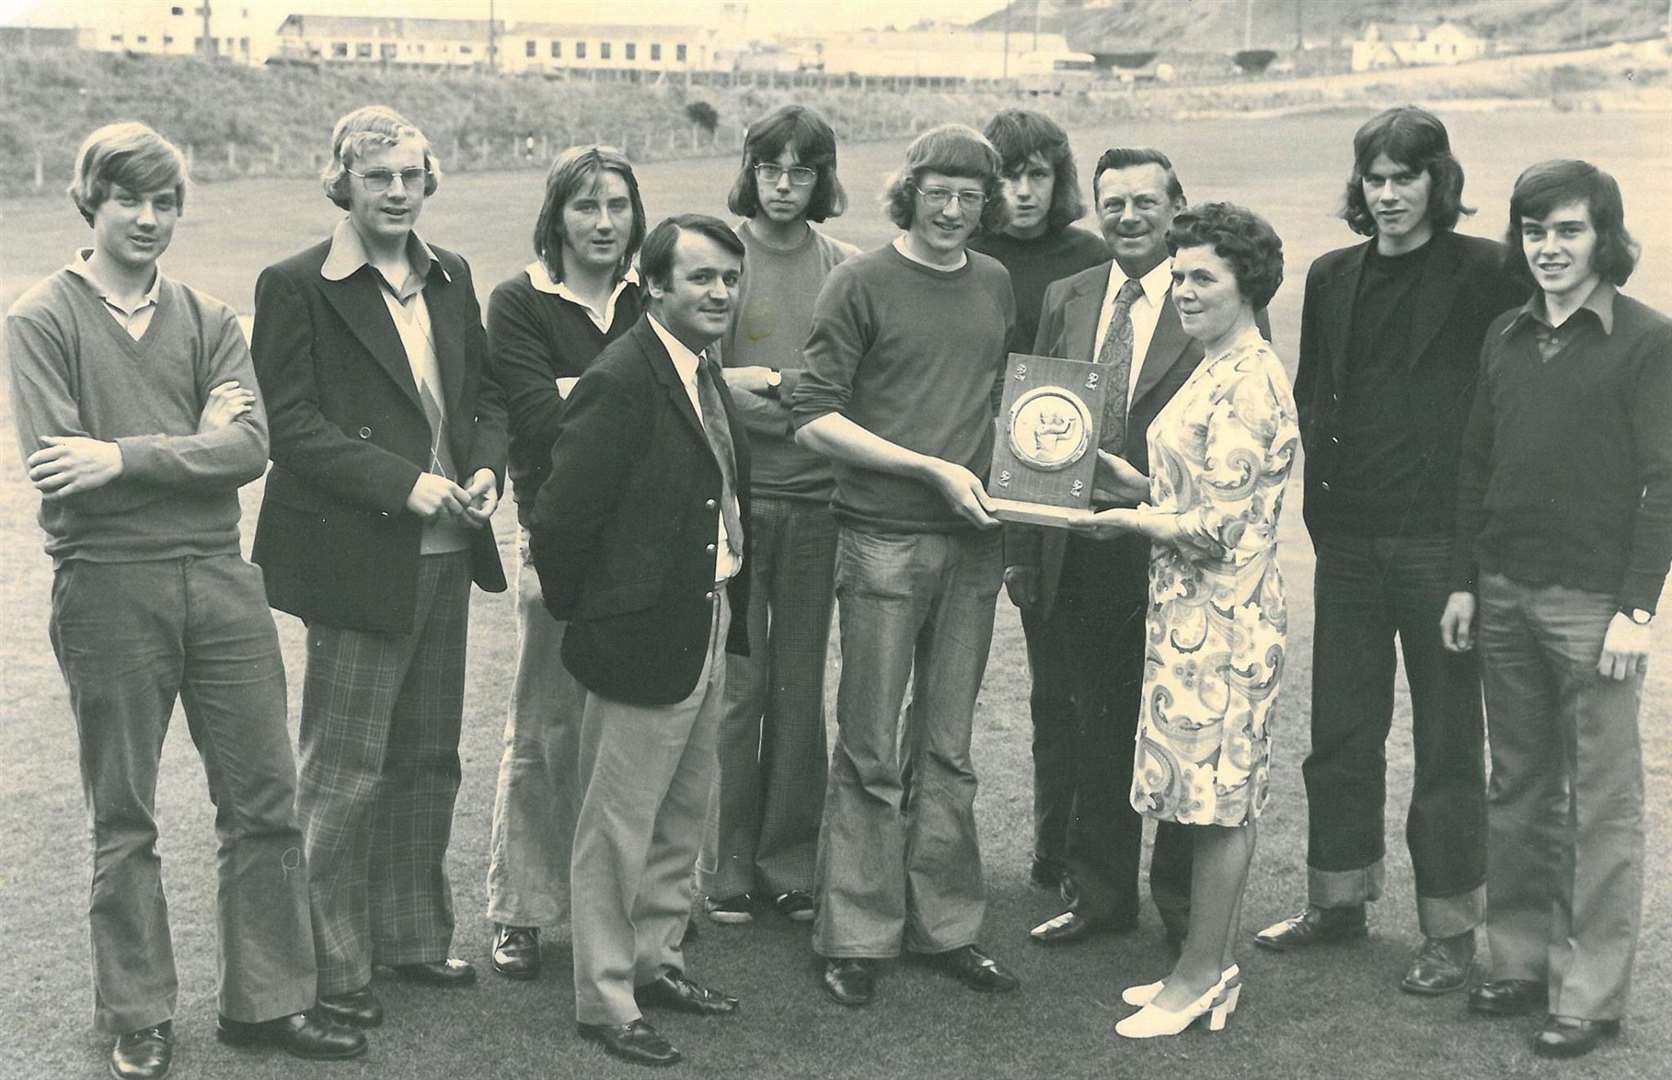 The first winners of the Felicity Cup in 1974, from left: Sandy Chalmers, Walter Robertson, John Lawrence, Paul Watson, Alan Kennedy, Ian Angus, Duncan Clark, Graham Hepburn, presented by junior convenor Sandy Rennie, and John and Kathleen Mair, owners of the fishing boat Felicity who donated the trophy for inter-club competition.